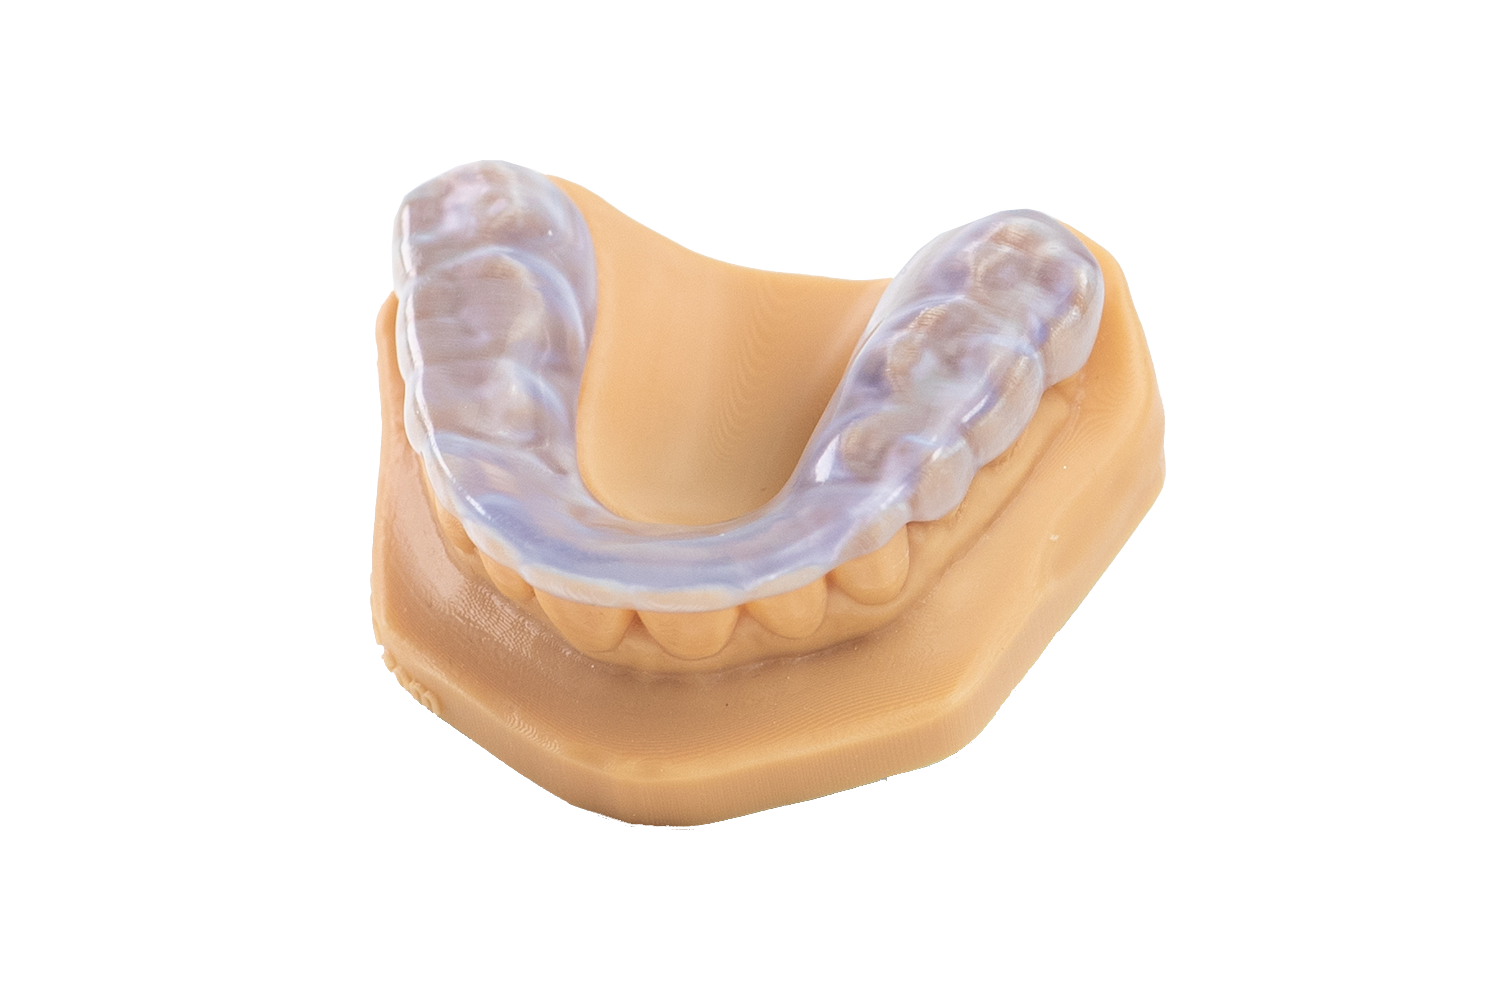 orthodontic appliance models 3D printing services